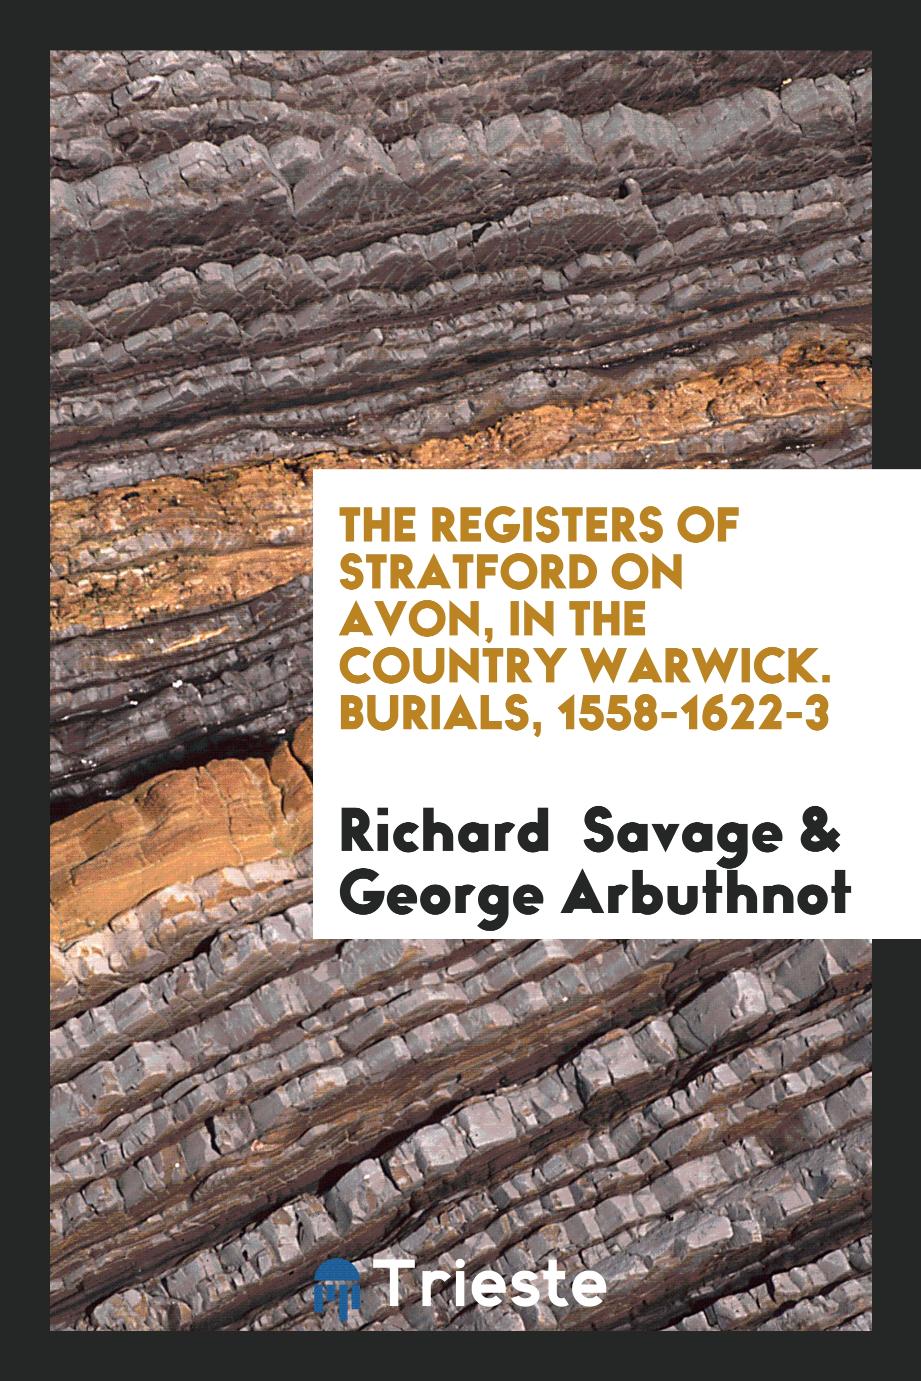 The Registers of Stratford on Avon, in the Country Warwick. Burials, 1558-1622-3